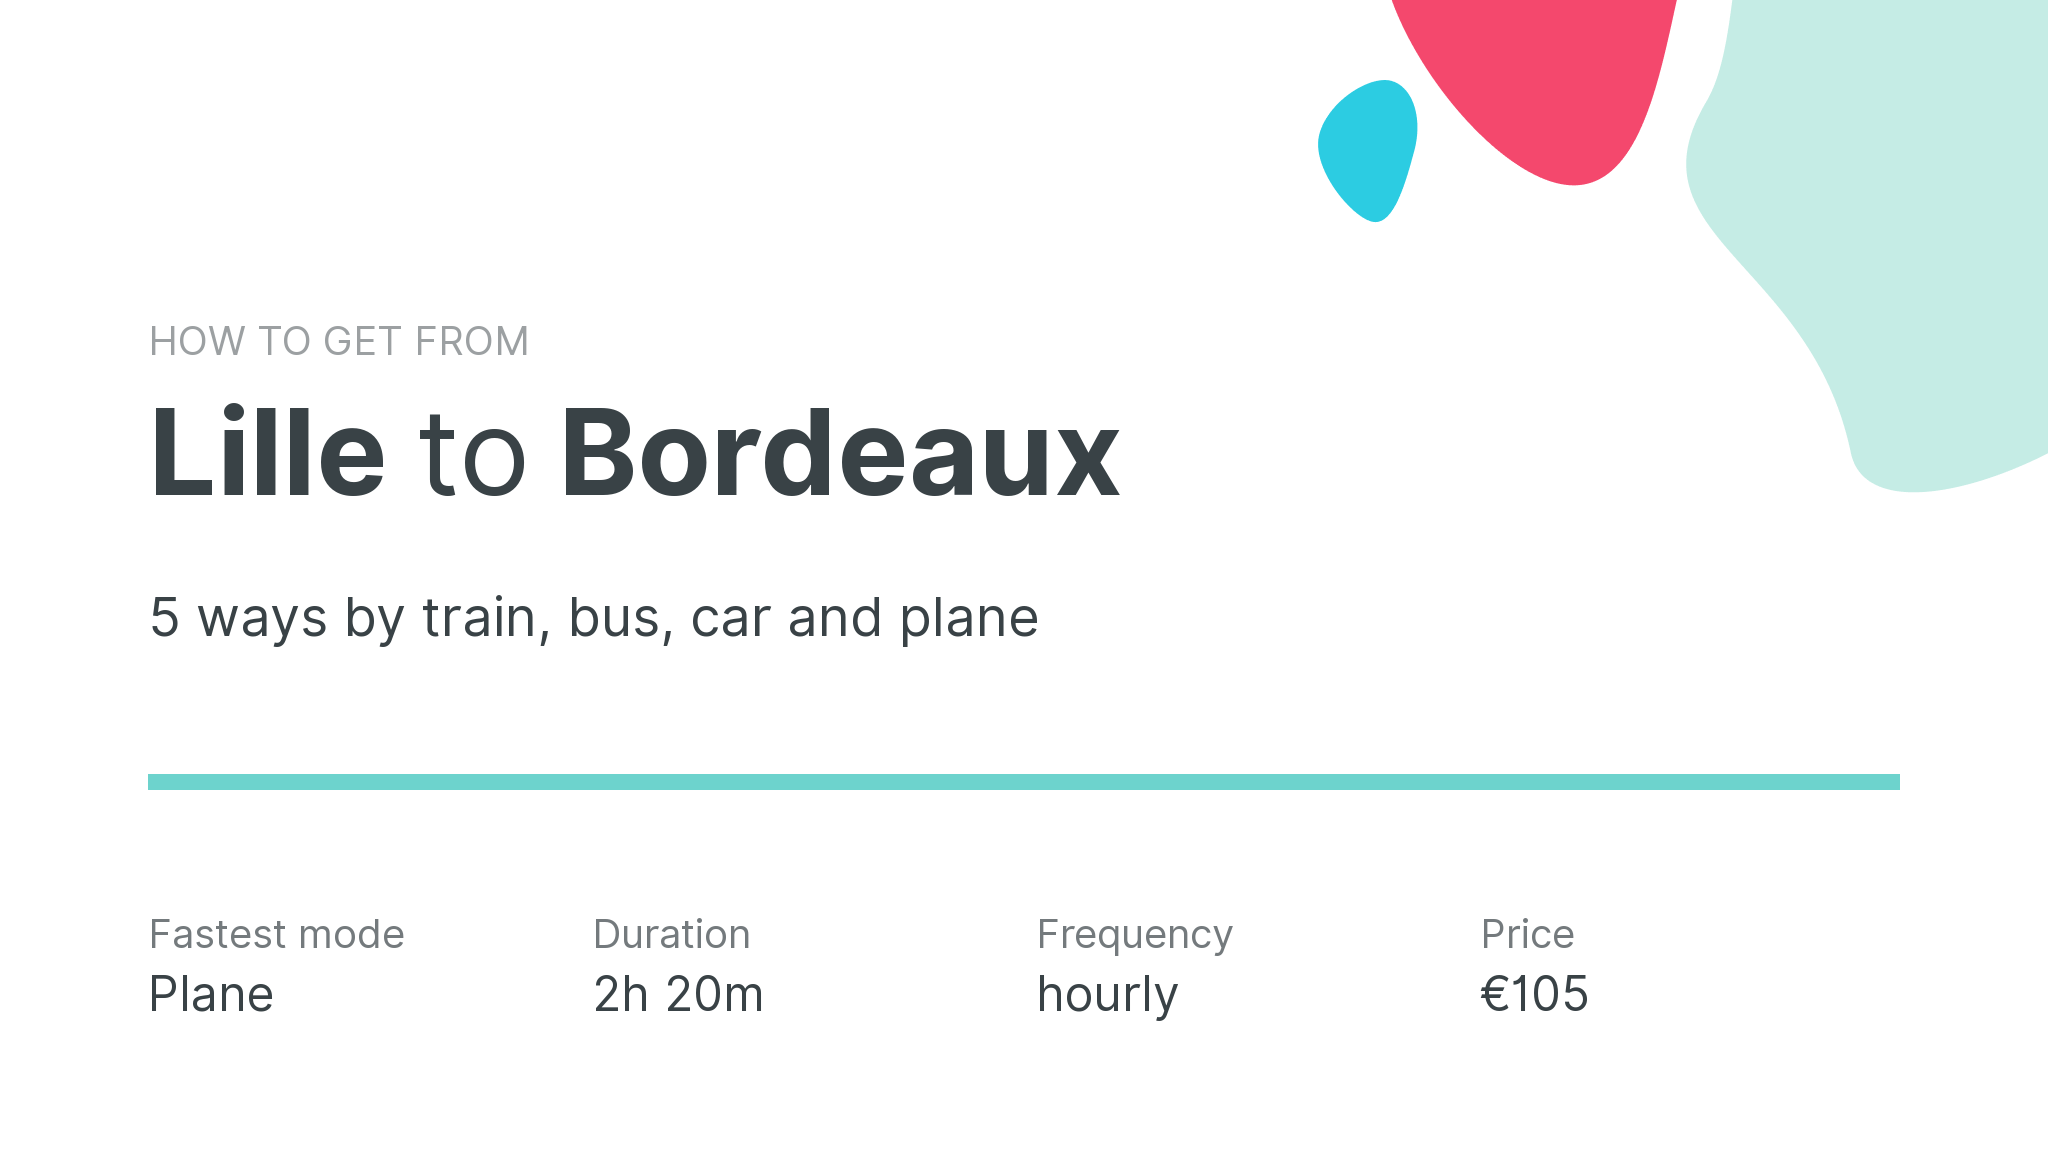 How do I get from Lille to Bordeaux